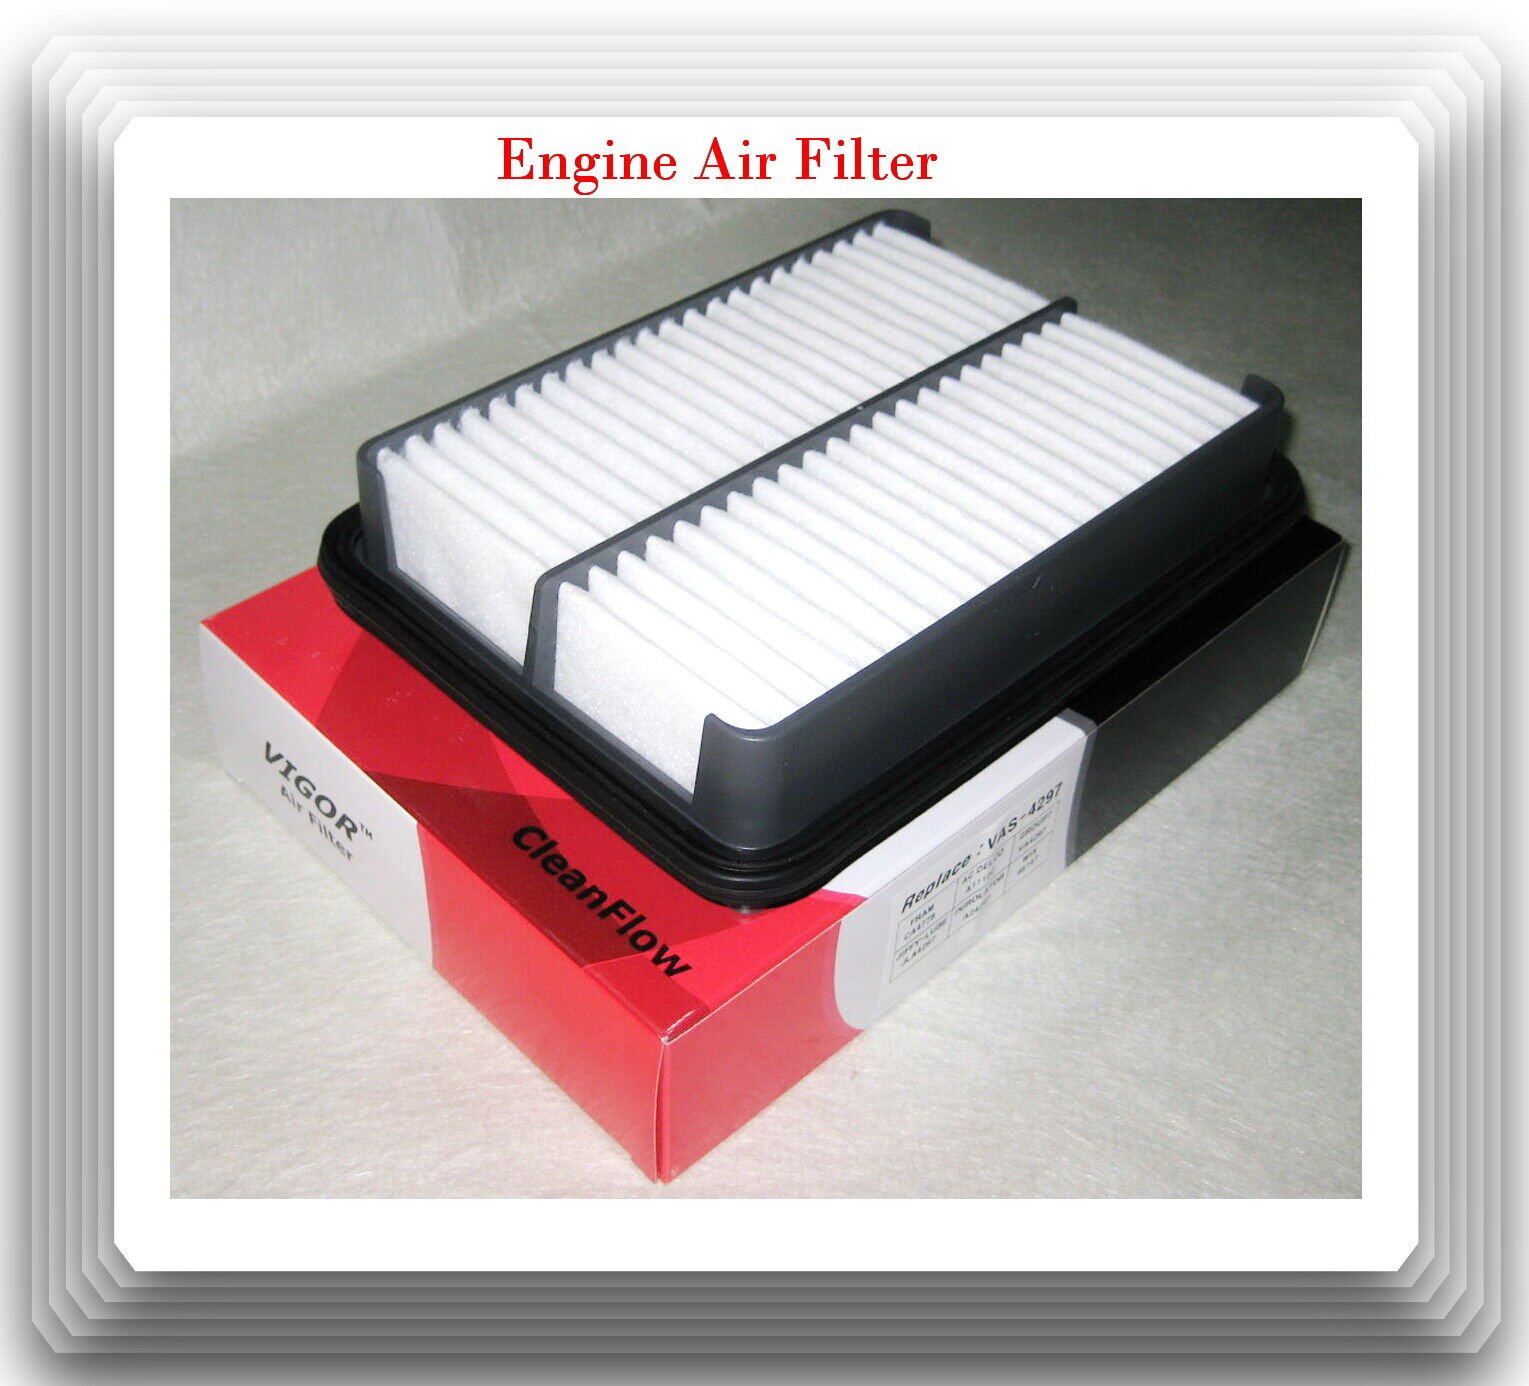 Engine Air Filter Fits:Fram CA4778 Wix 46147 Group7 VA4297 Charade Camry Corolla